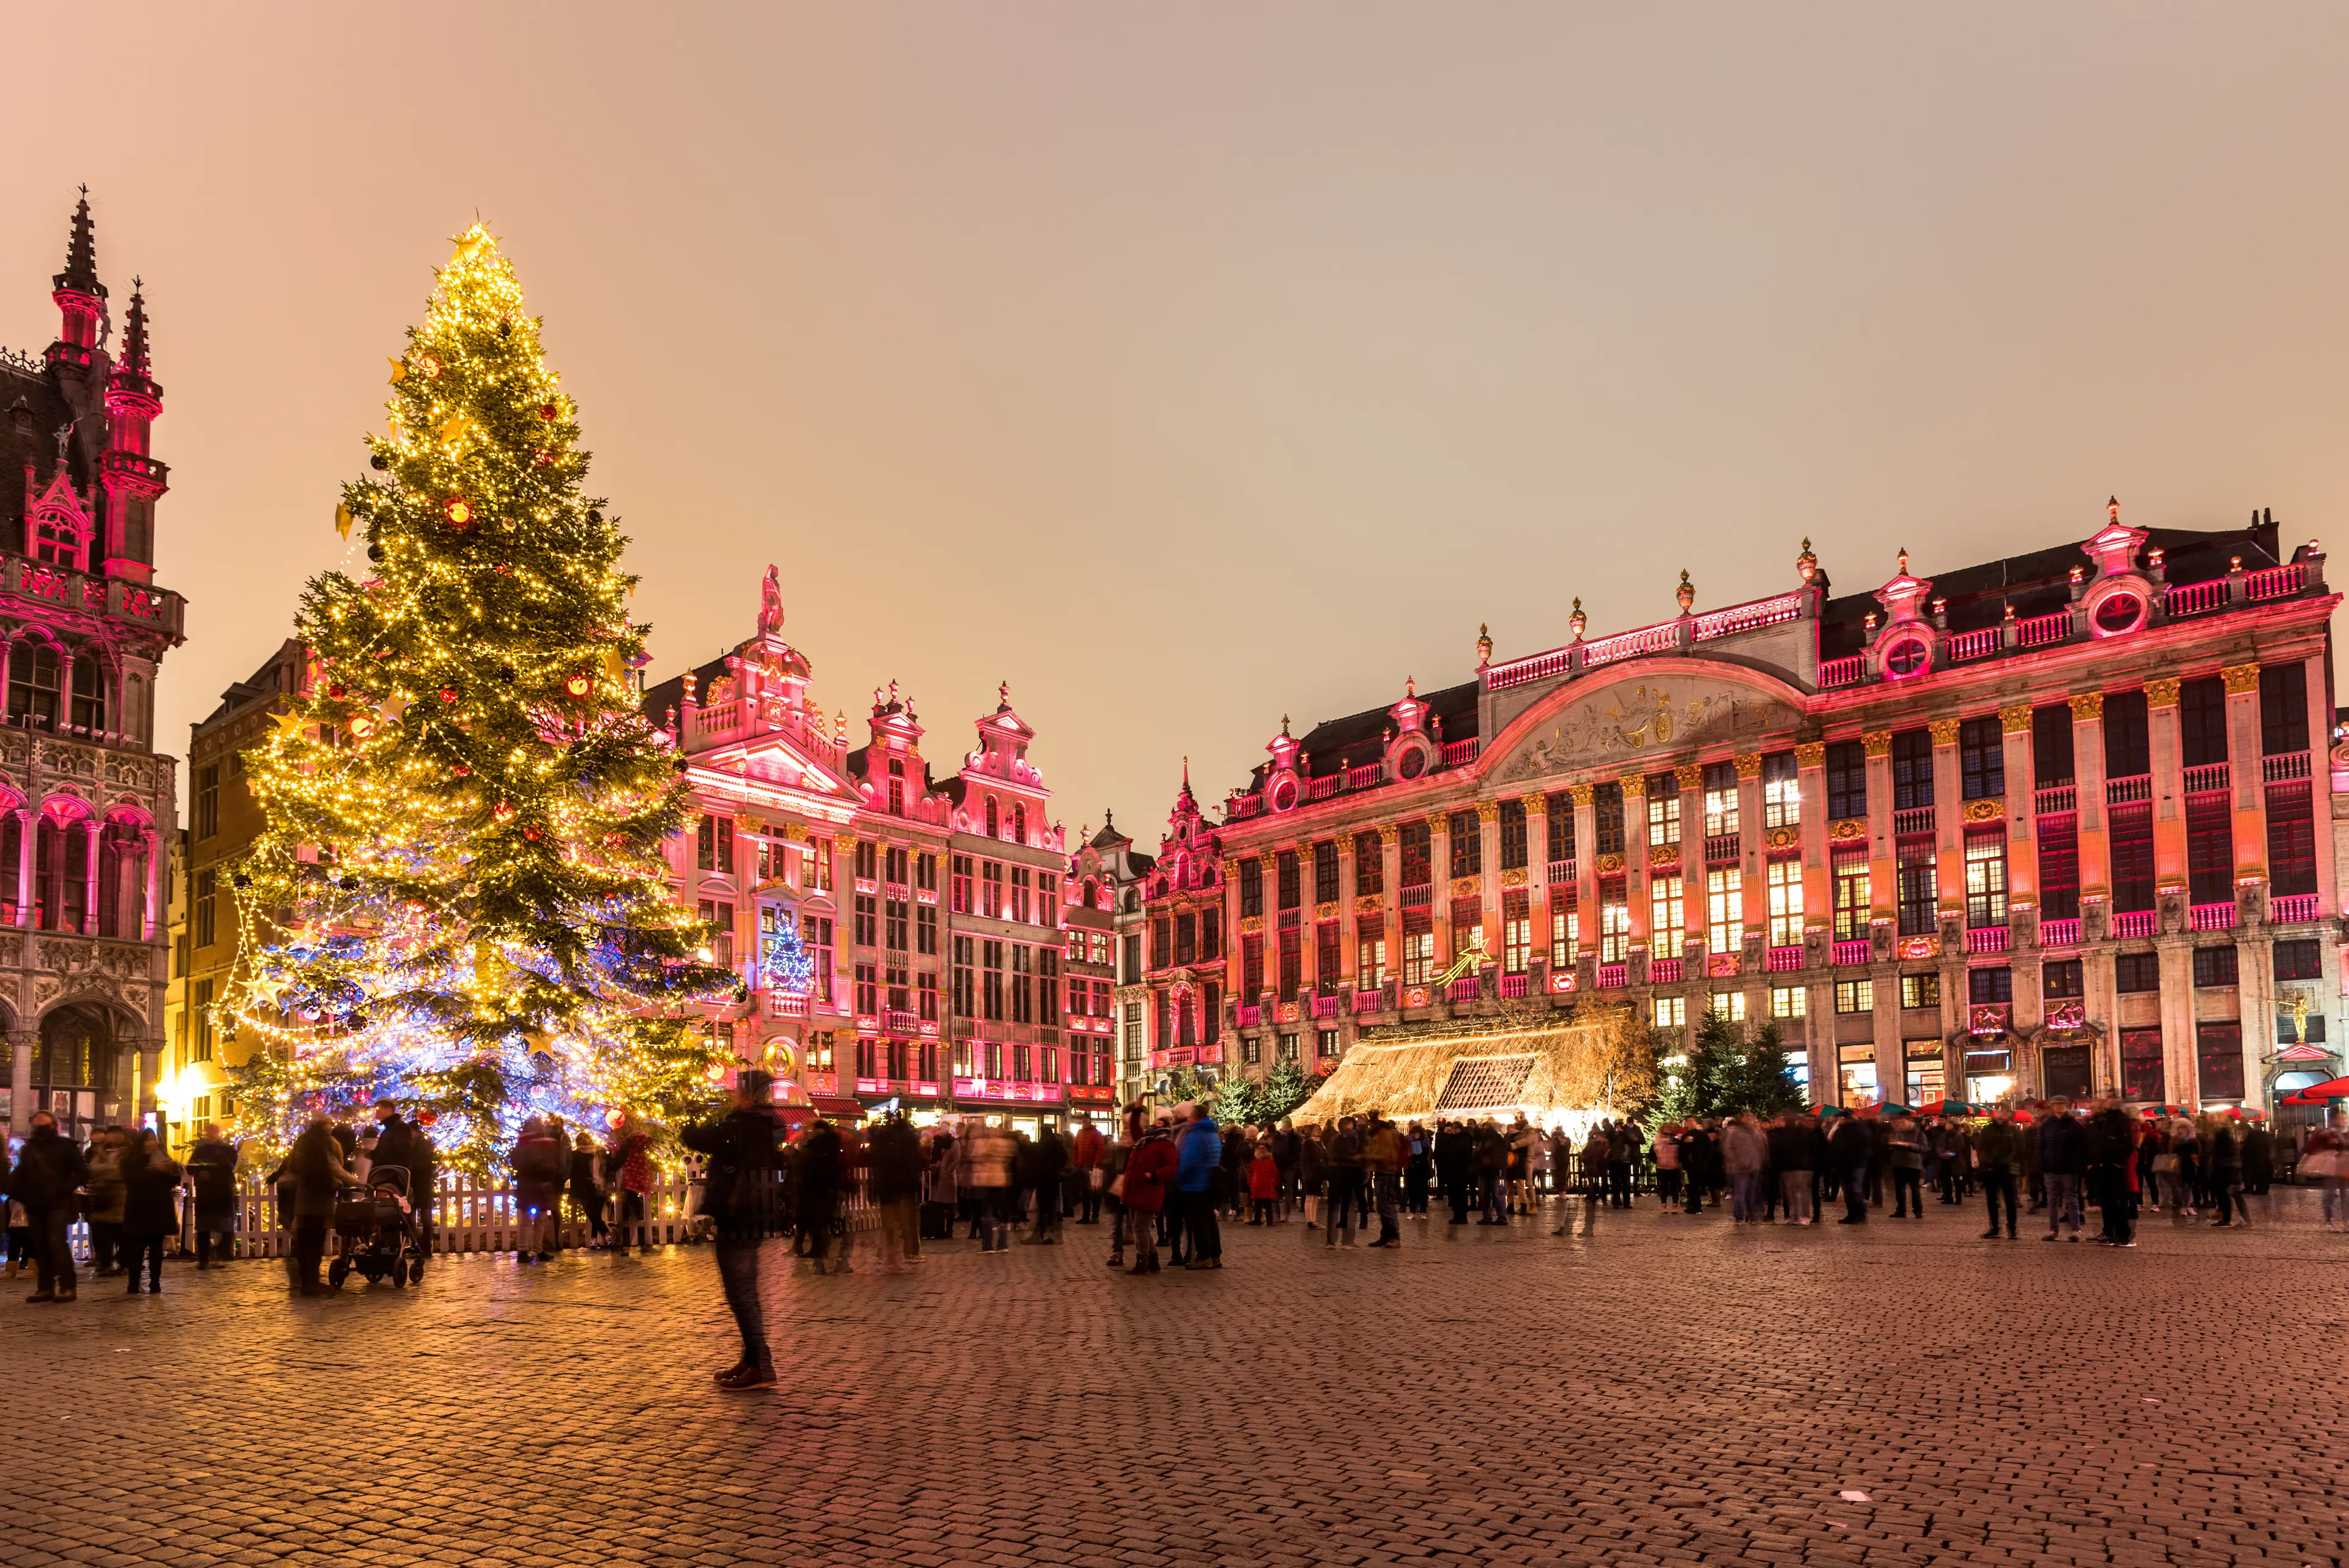 Grand Place decorated and illuminated for Christmas